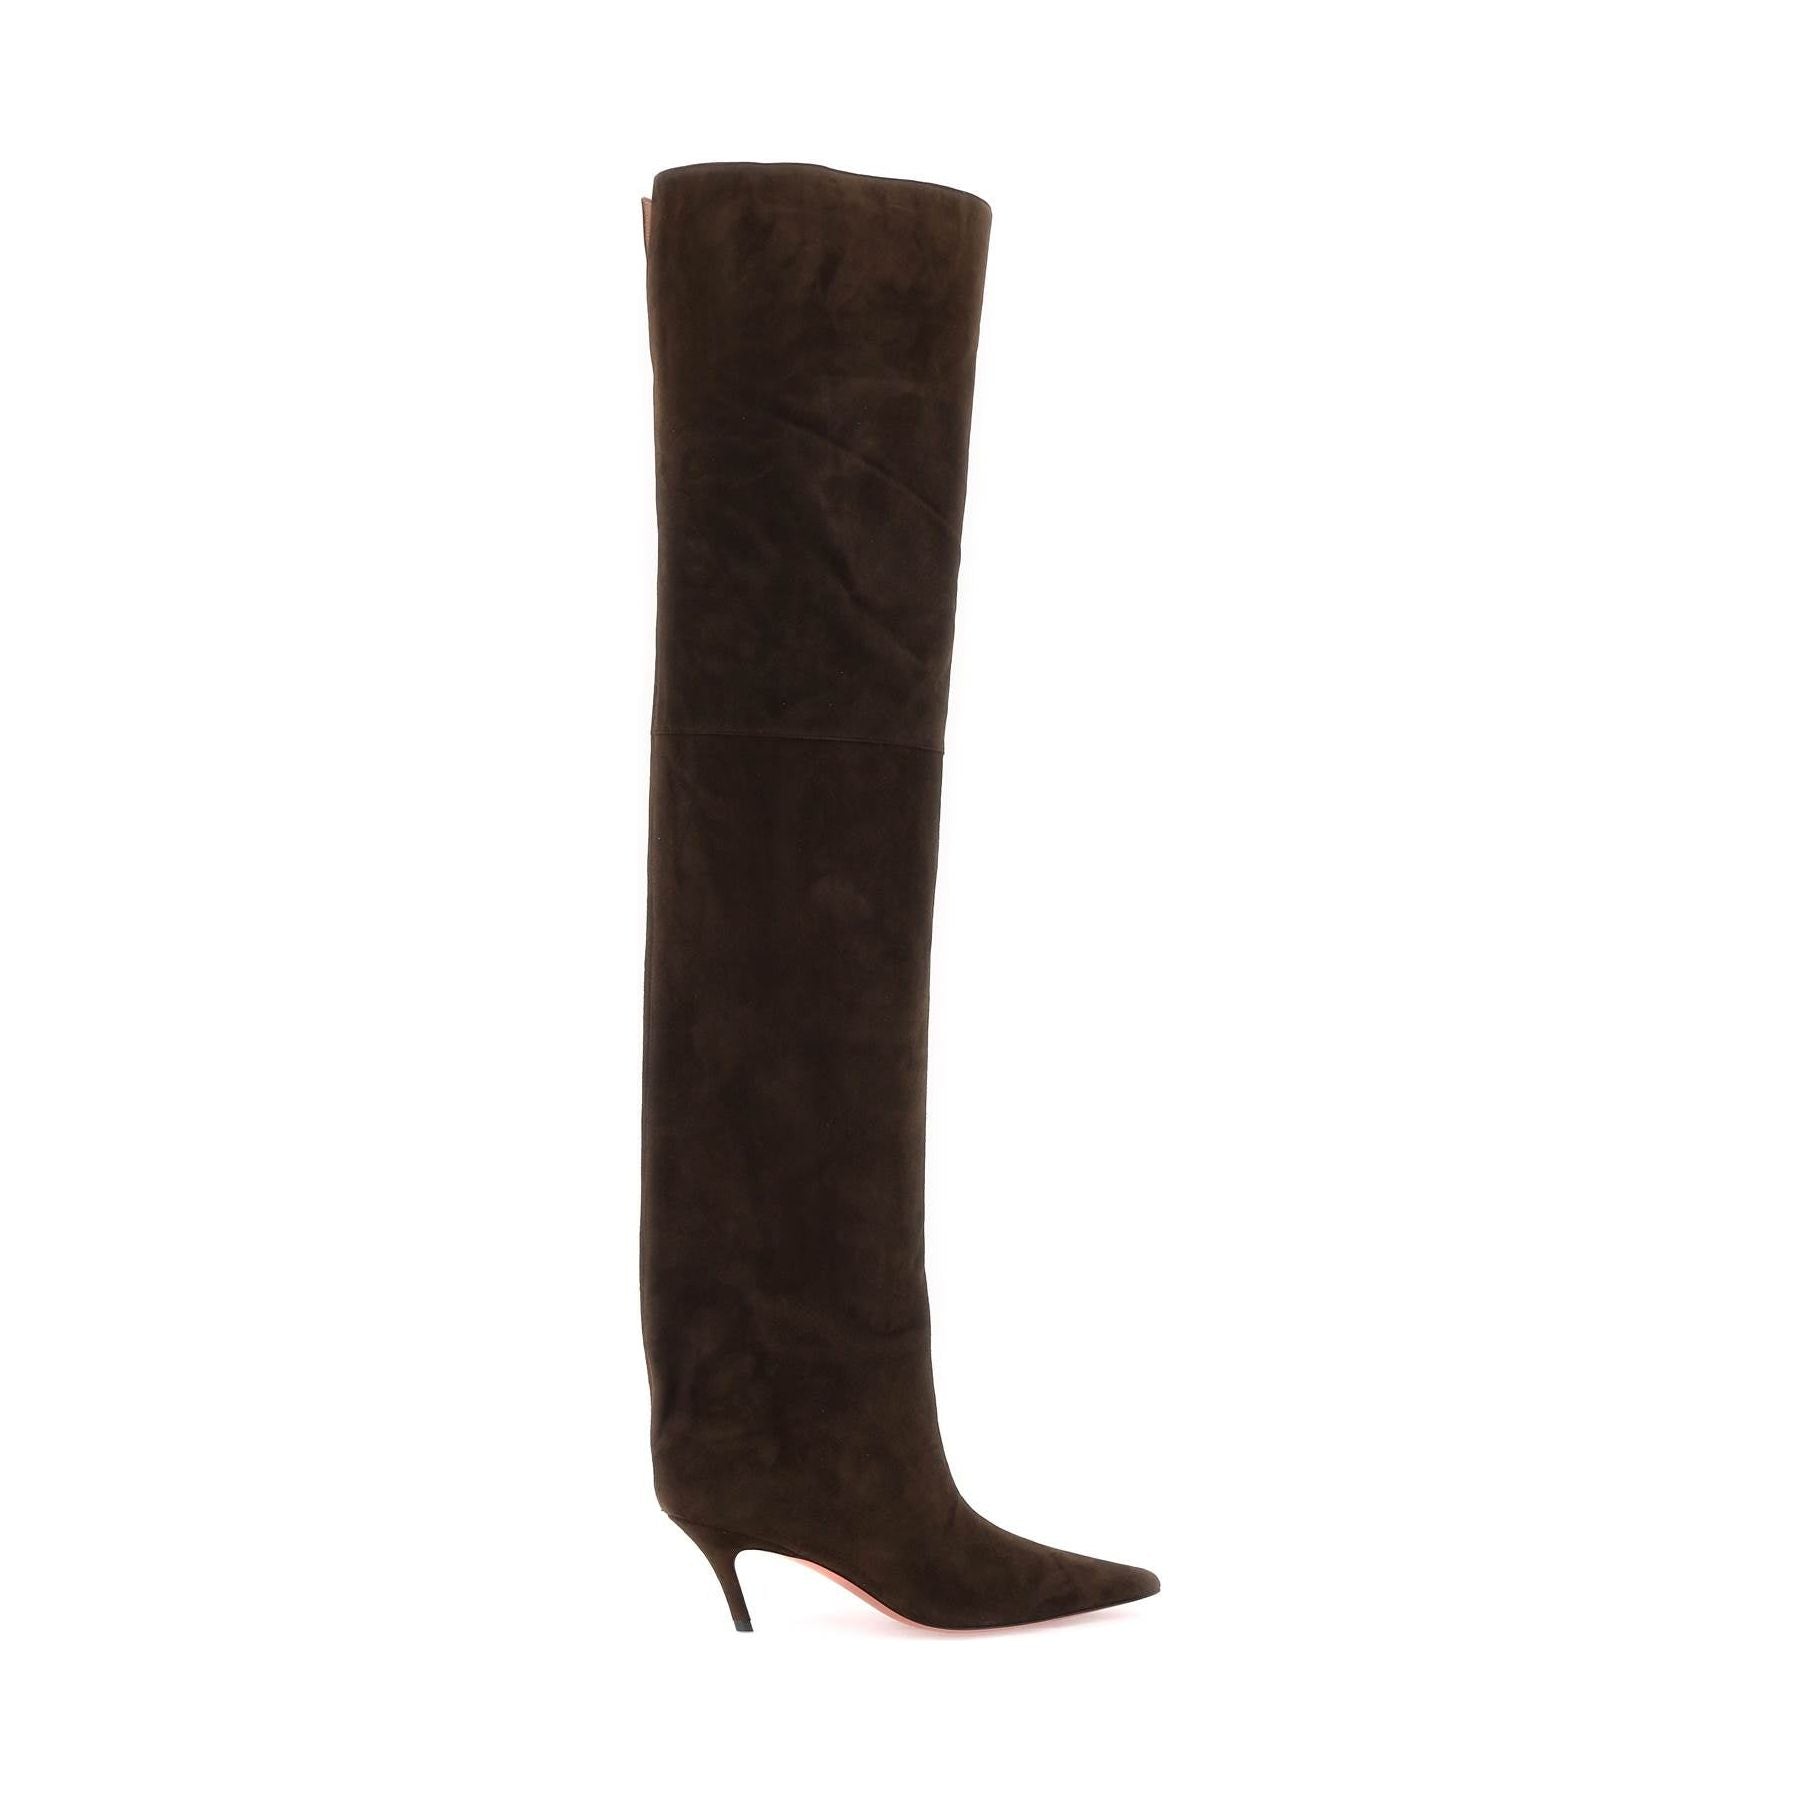 Suede Fiona Thigh High Boots